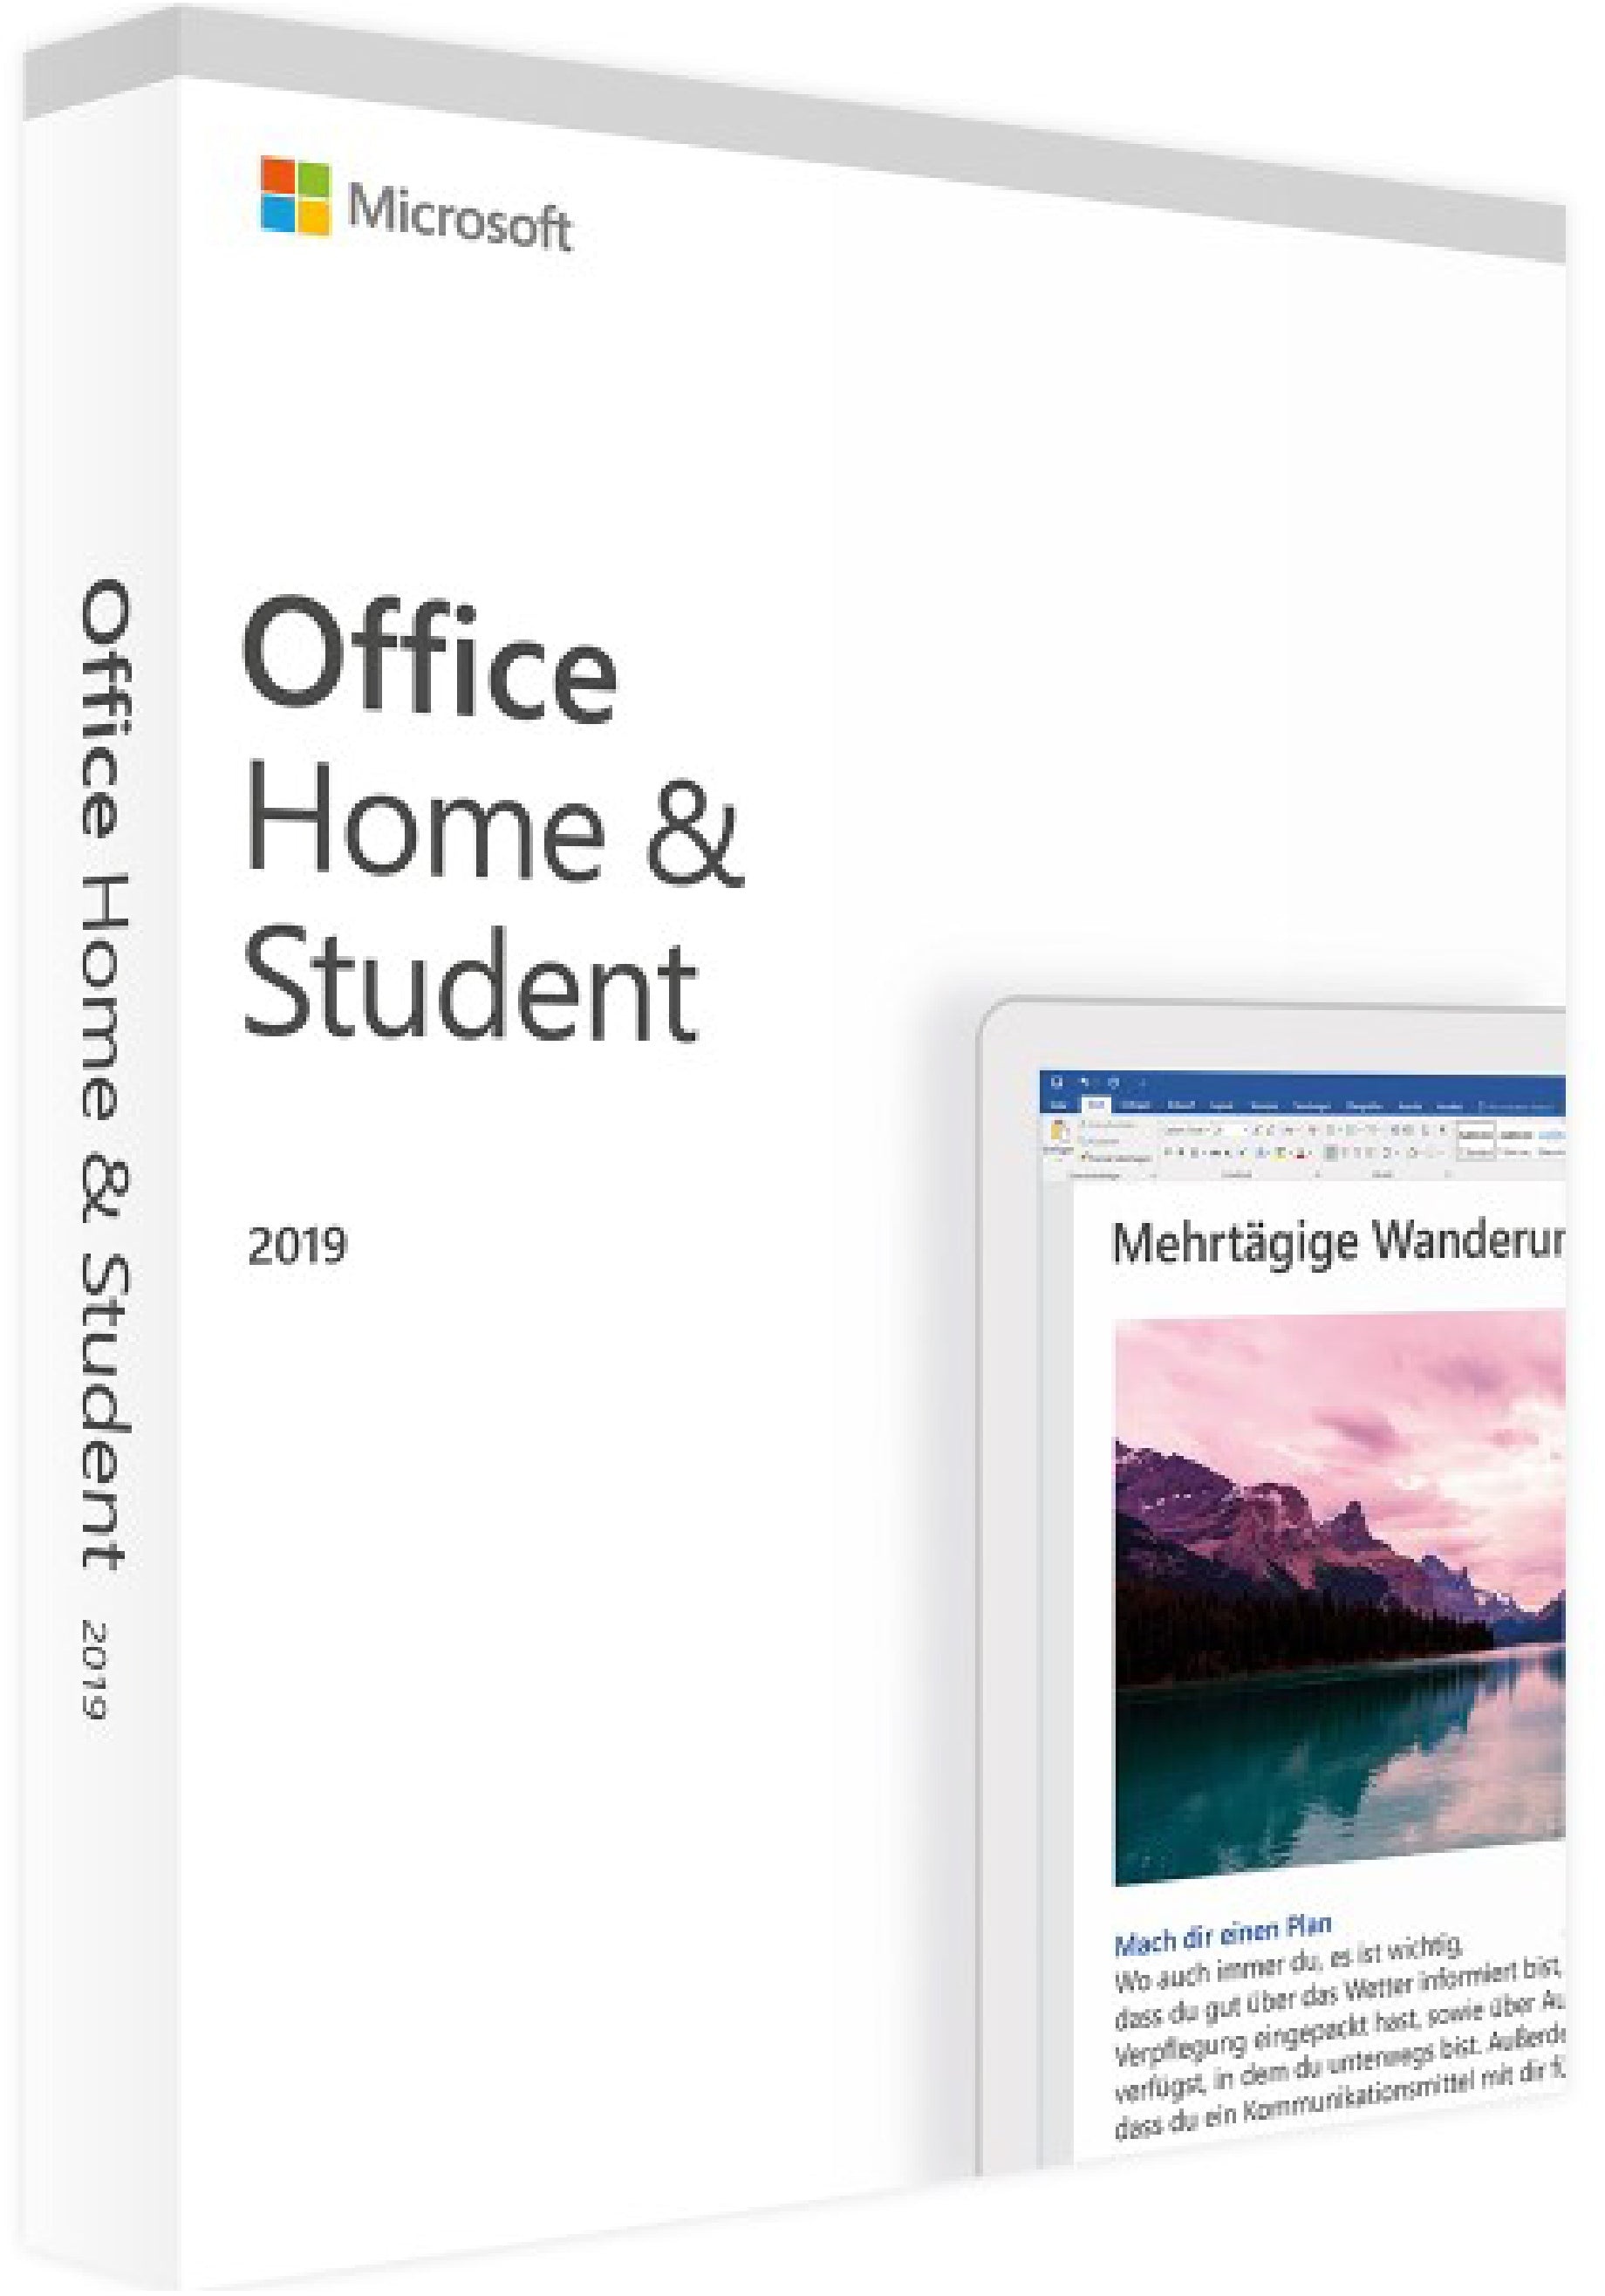 #Microsoft Office 2019 Home and Student Windows